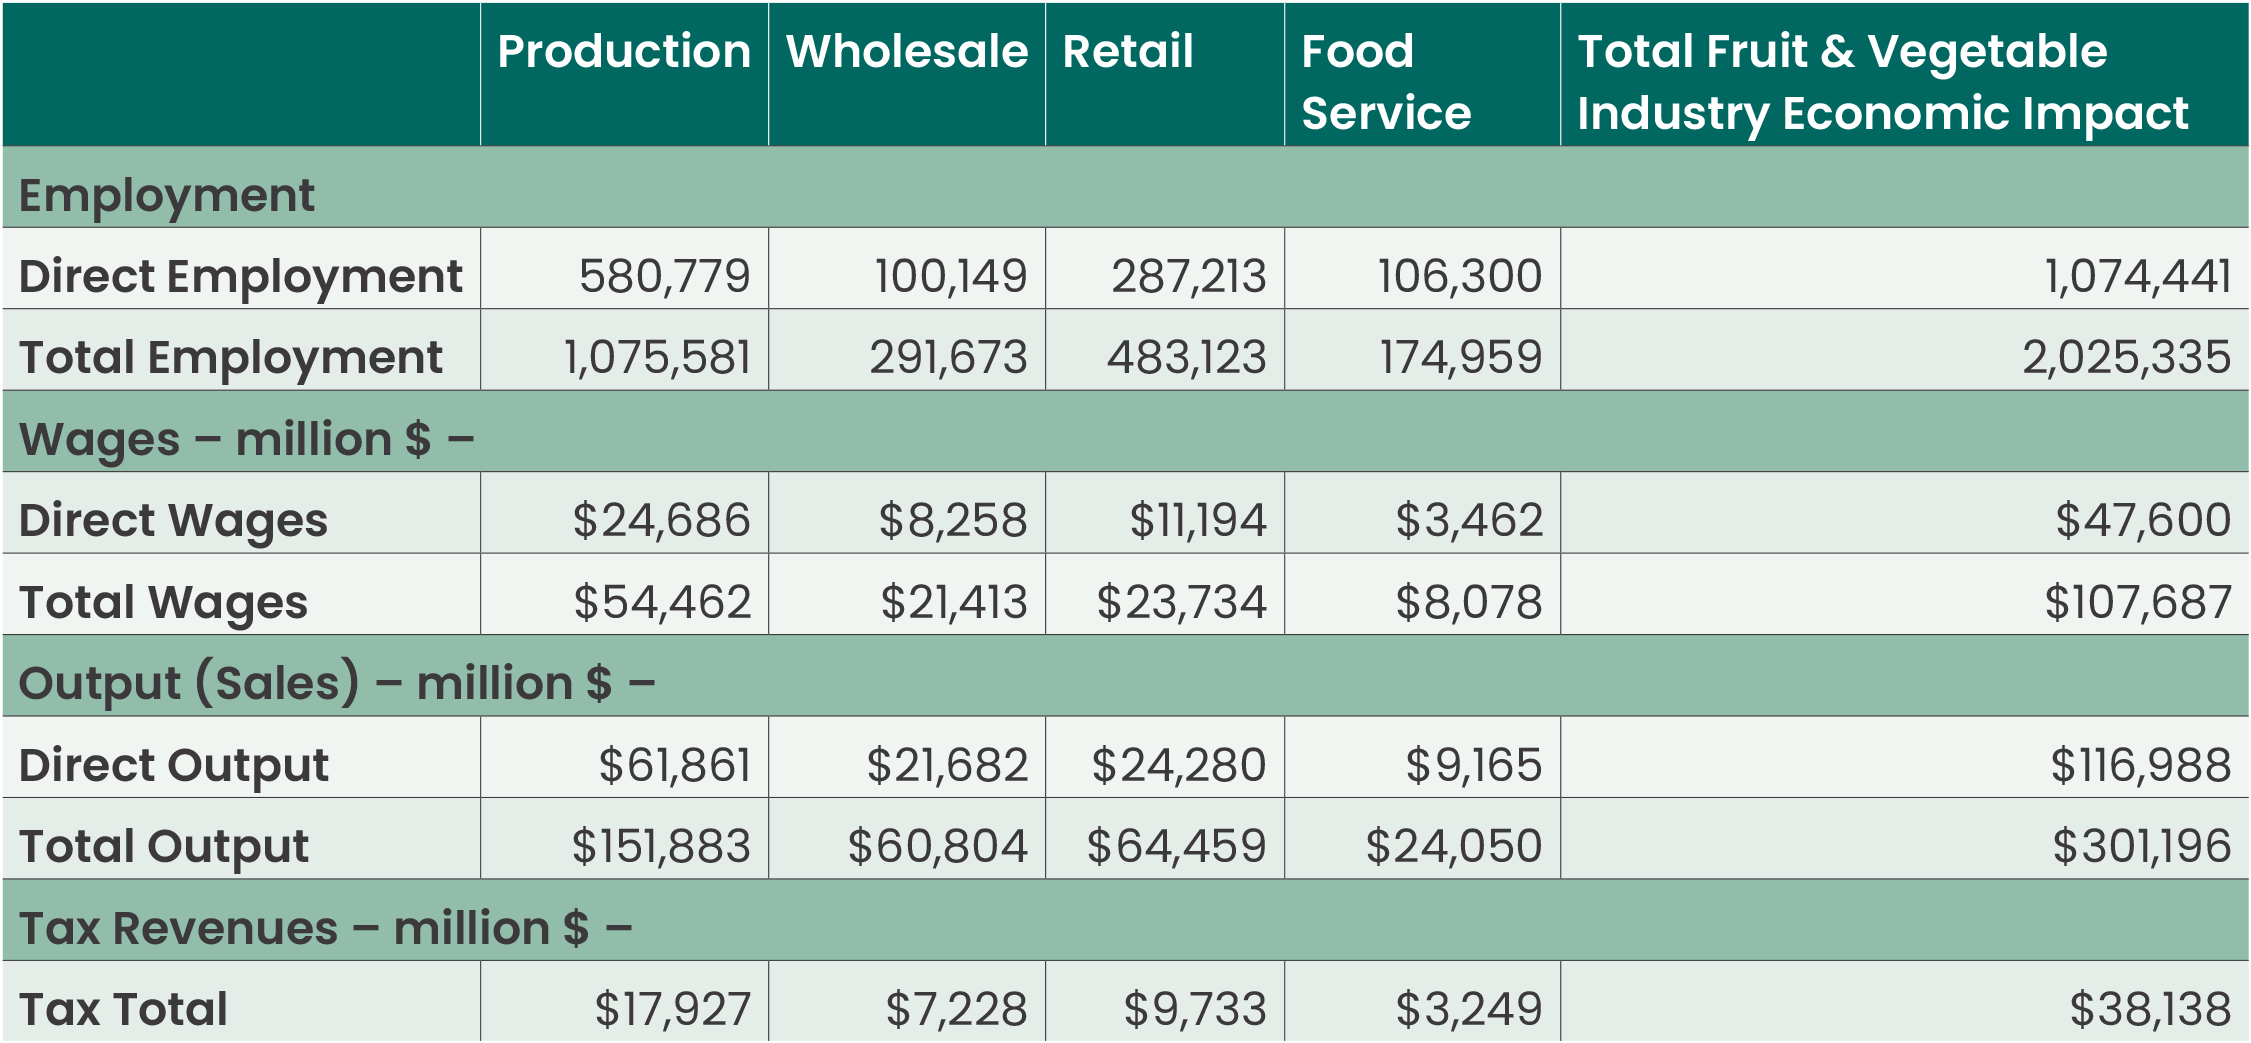 Chart showing Fruits and Vegetables Industry Economic Impact by Business Sector, 2019